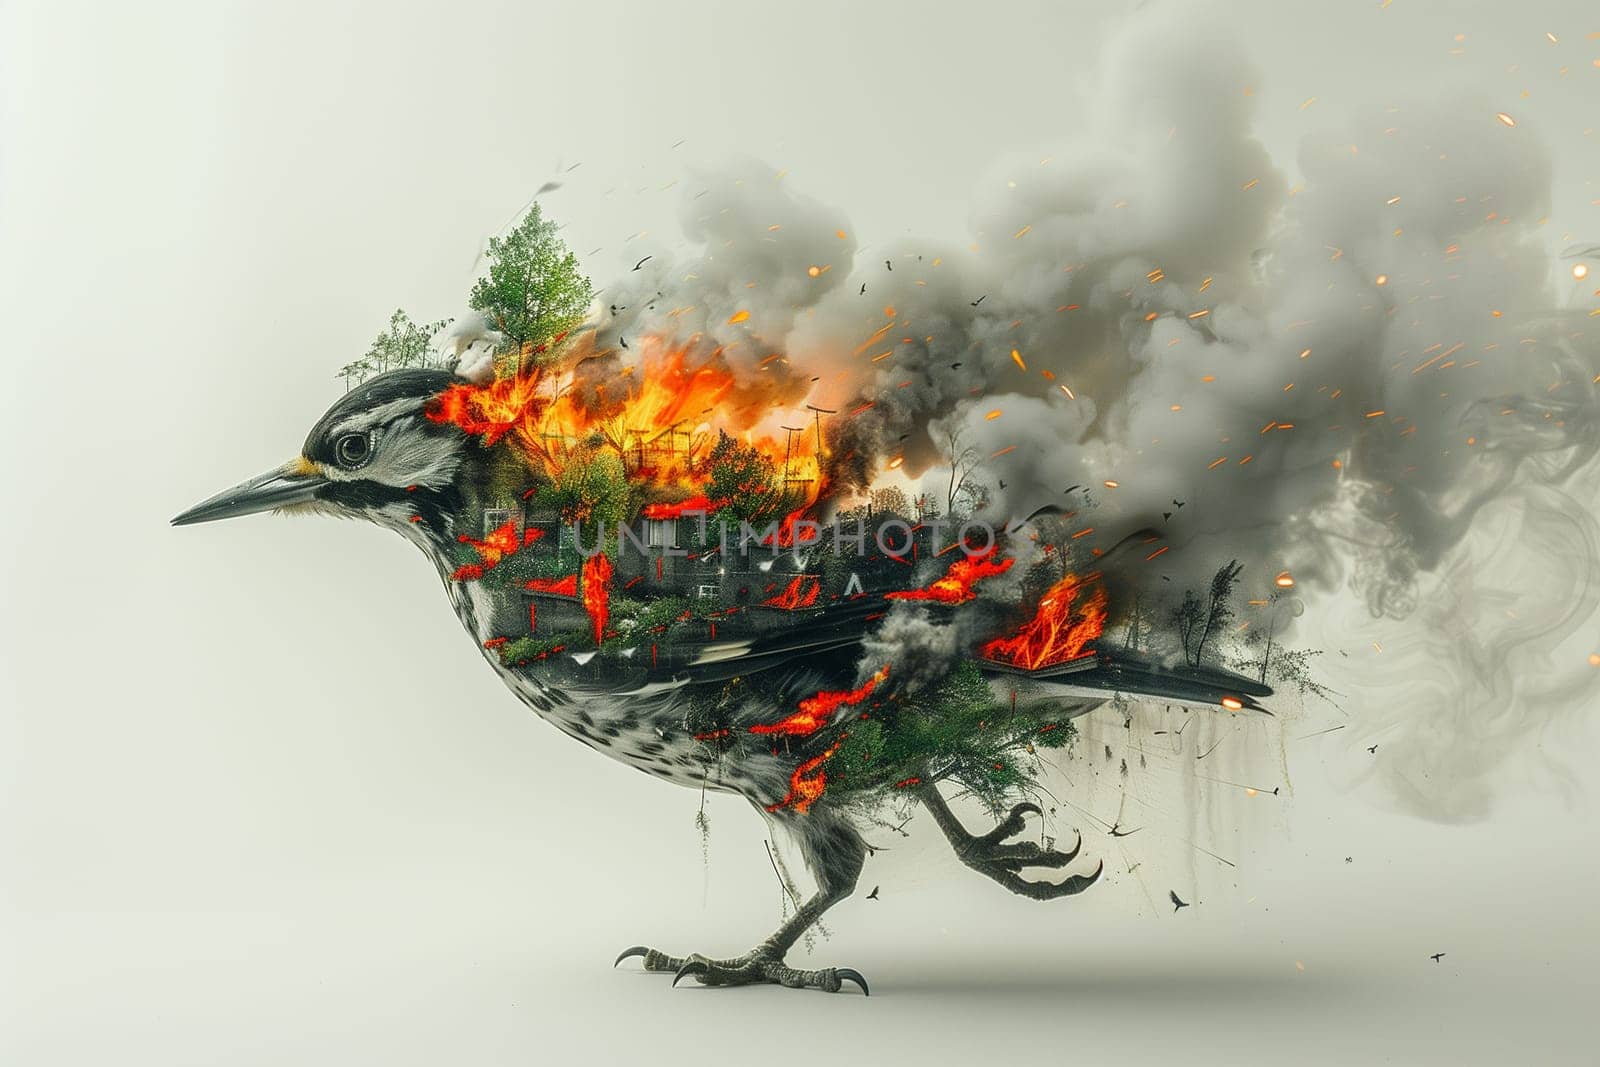 Woodpecker engulfed in flames on a white background by Sd28DimoN_1976